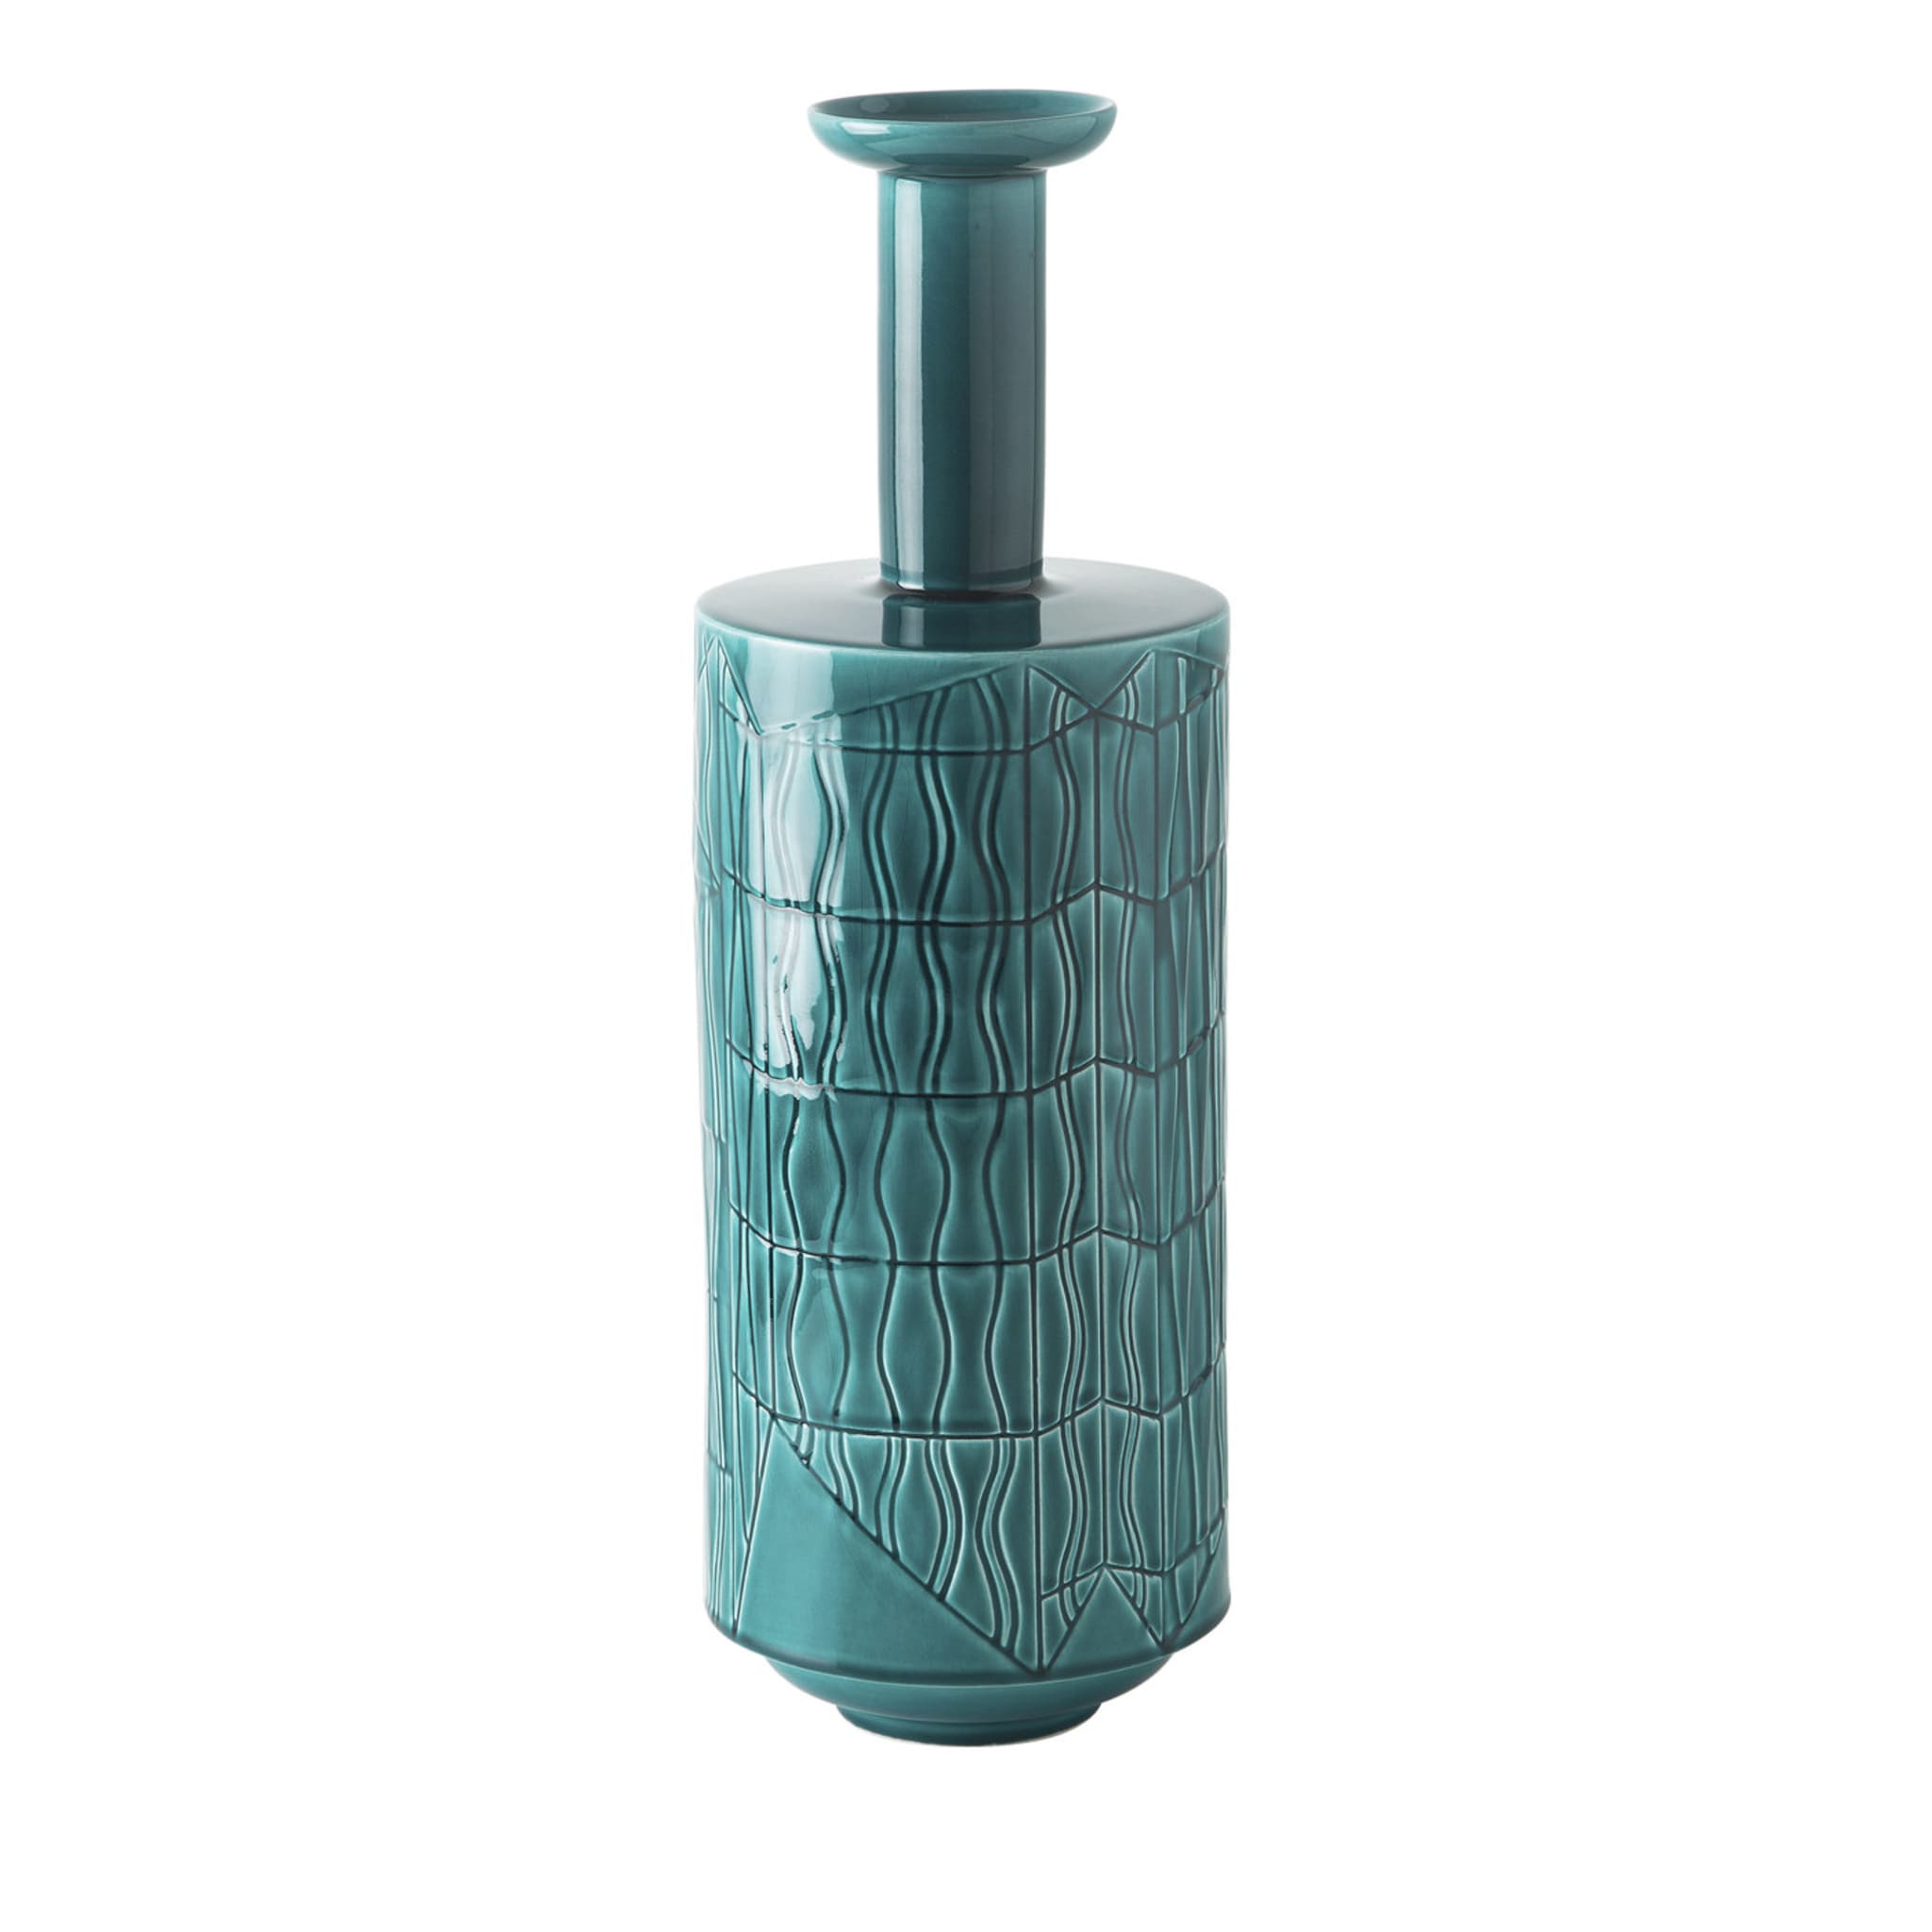 Tall Green Vase by Bethan Laura Wood - Main view